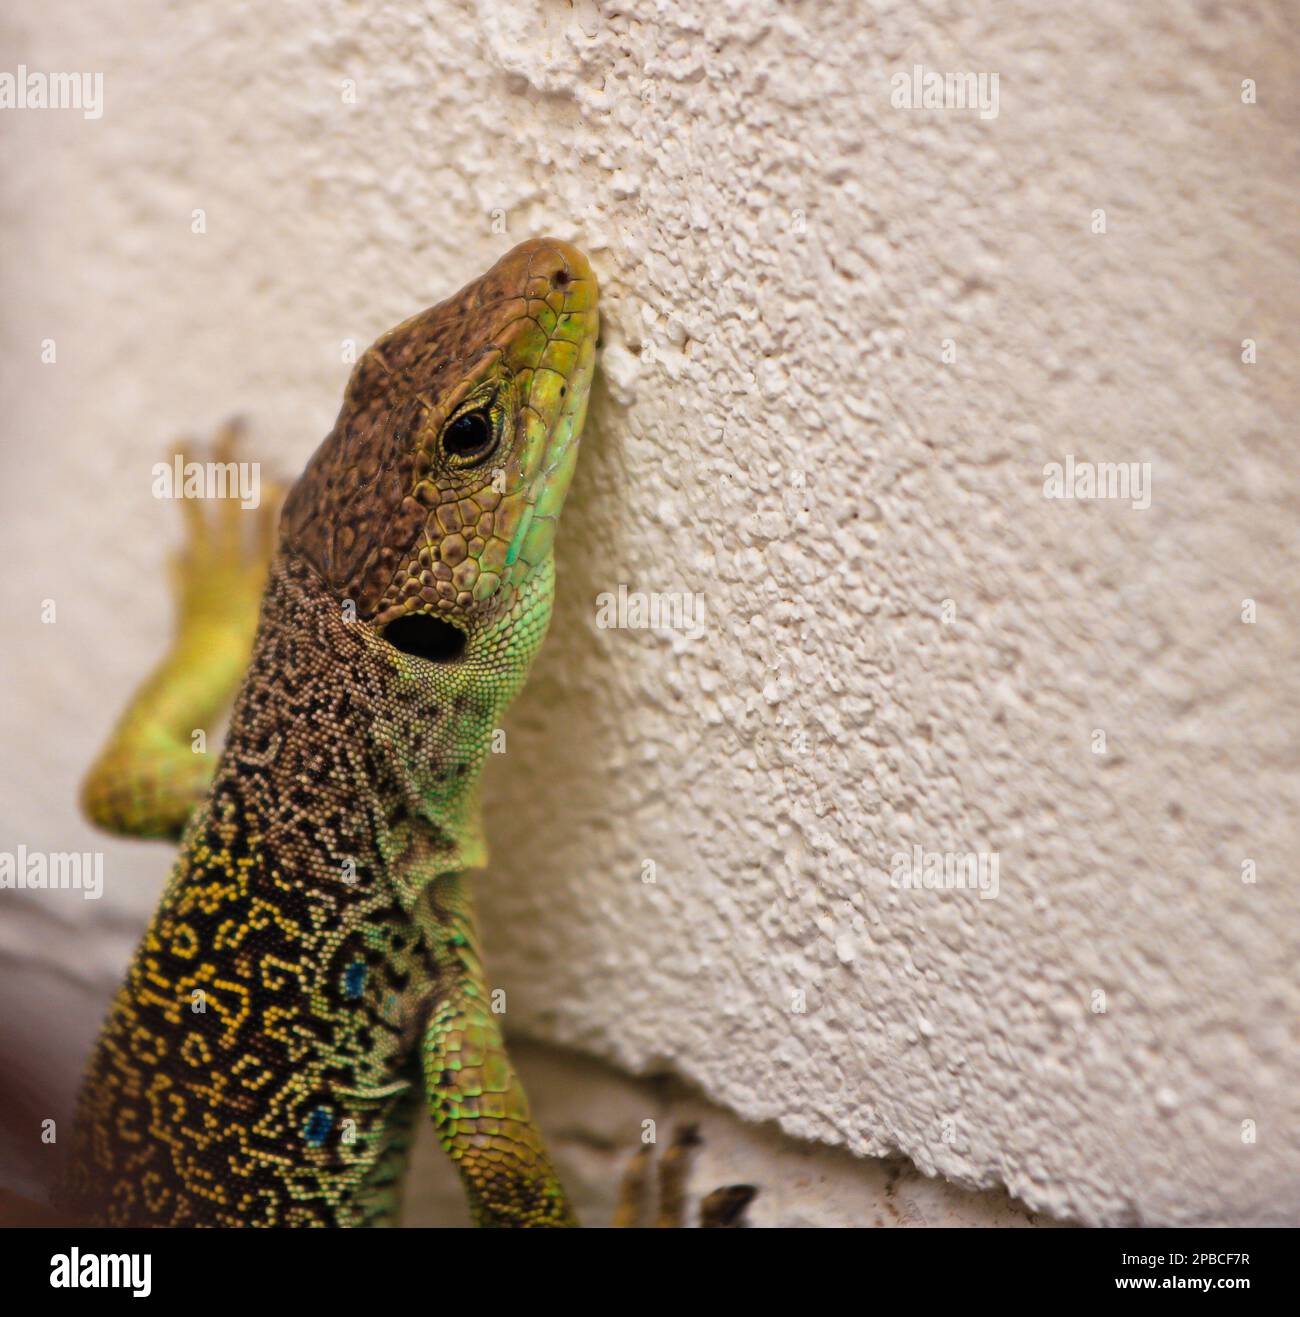 A lizard with a green face is standing on a wall. Stock Photo